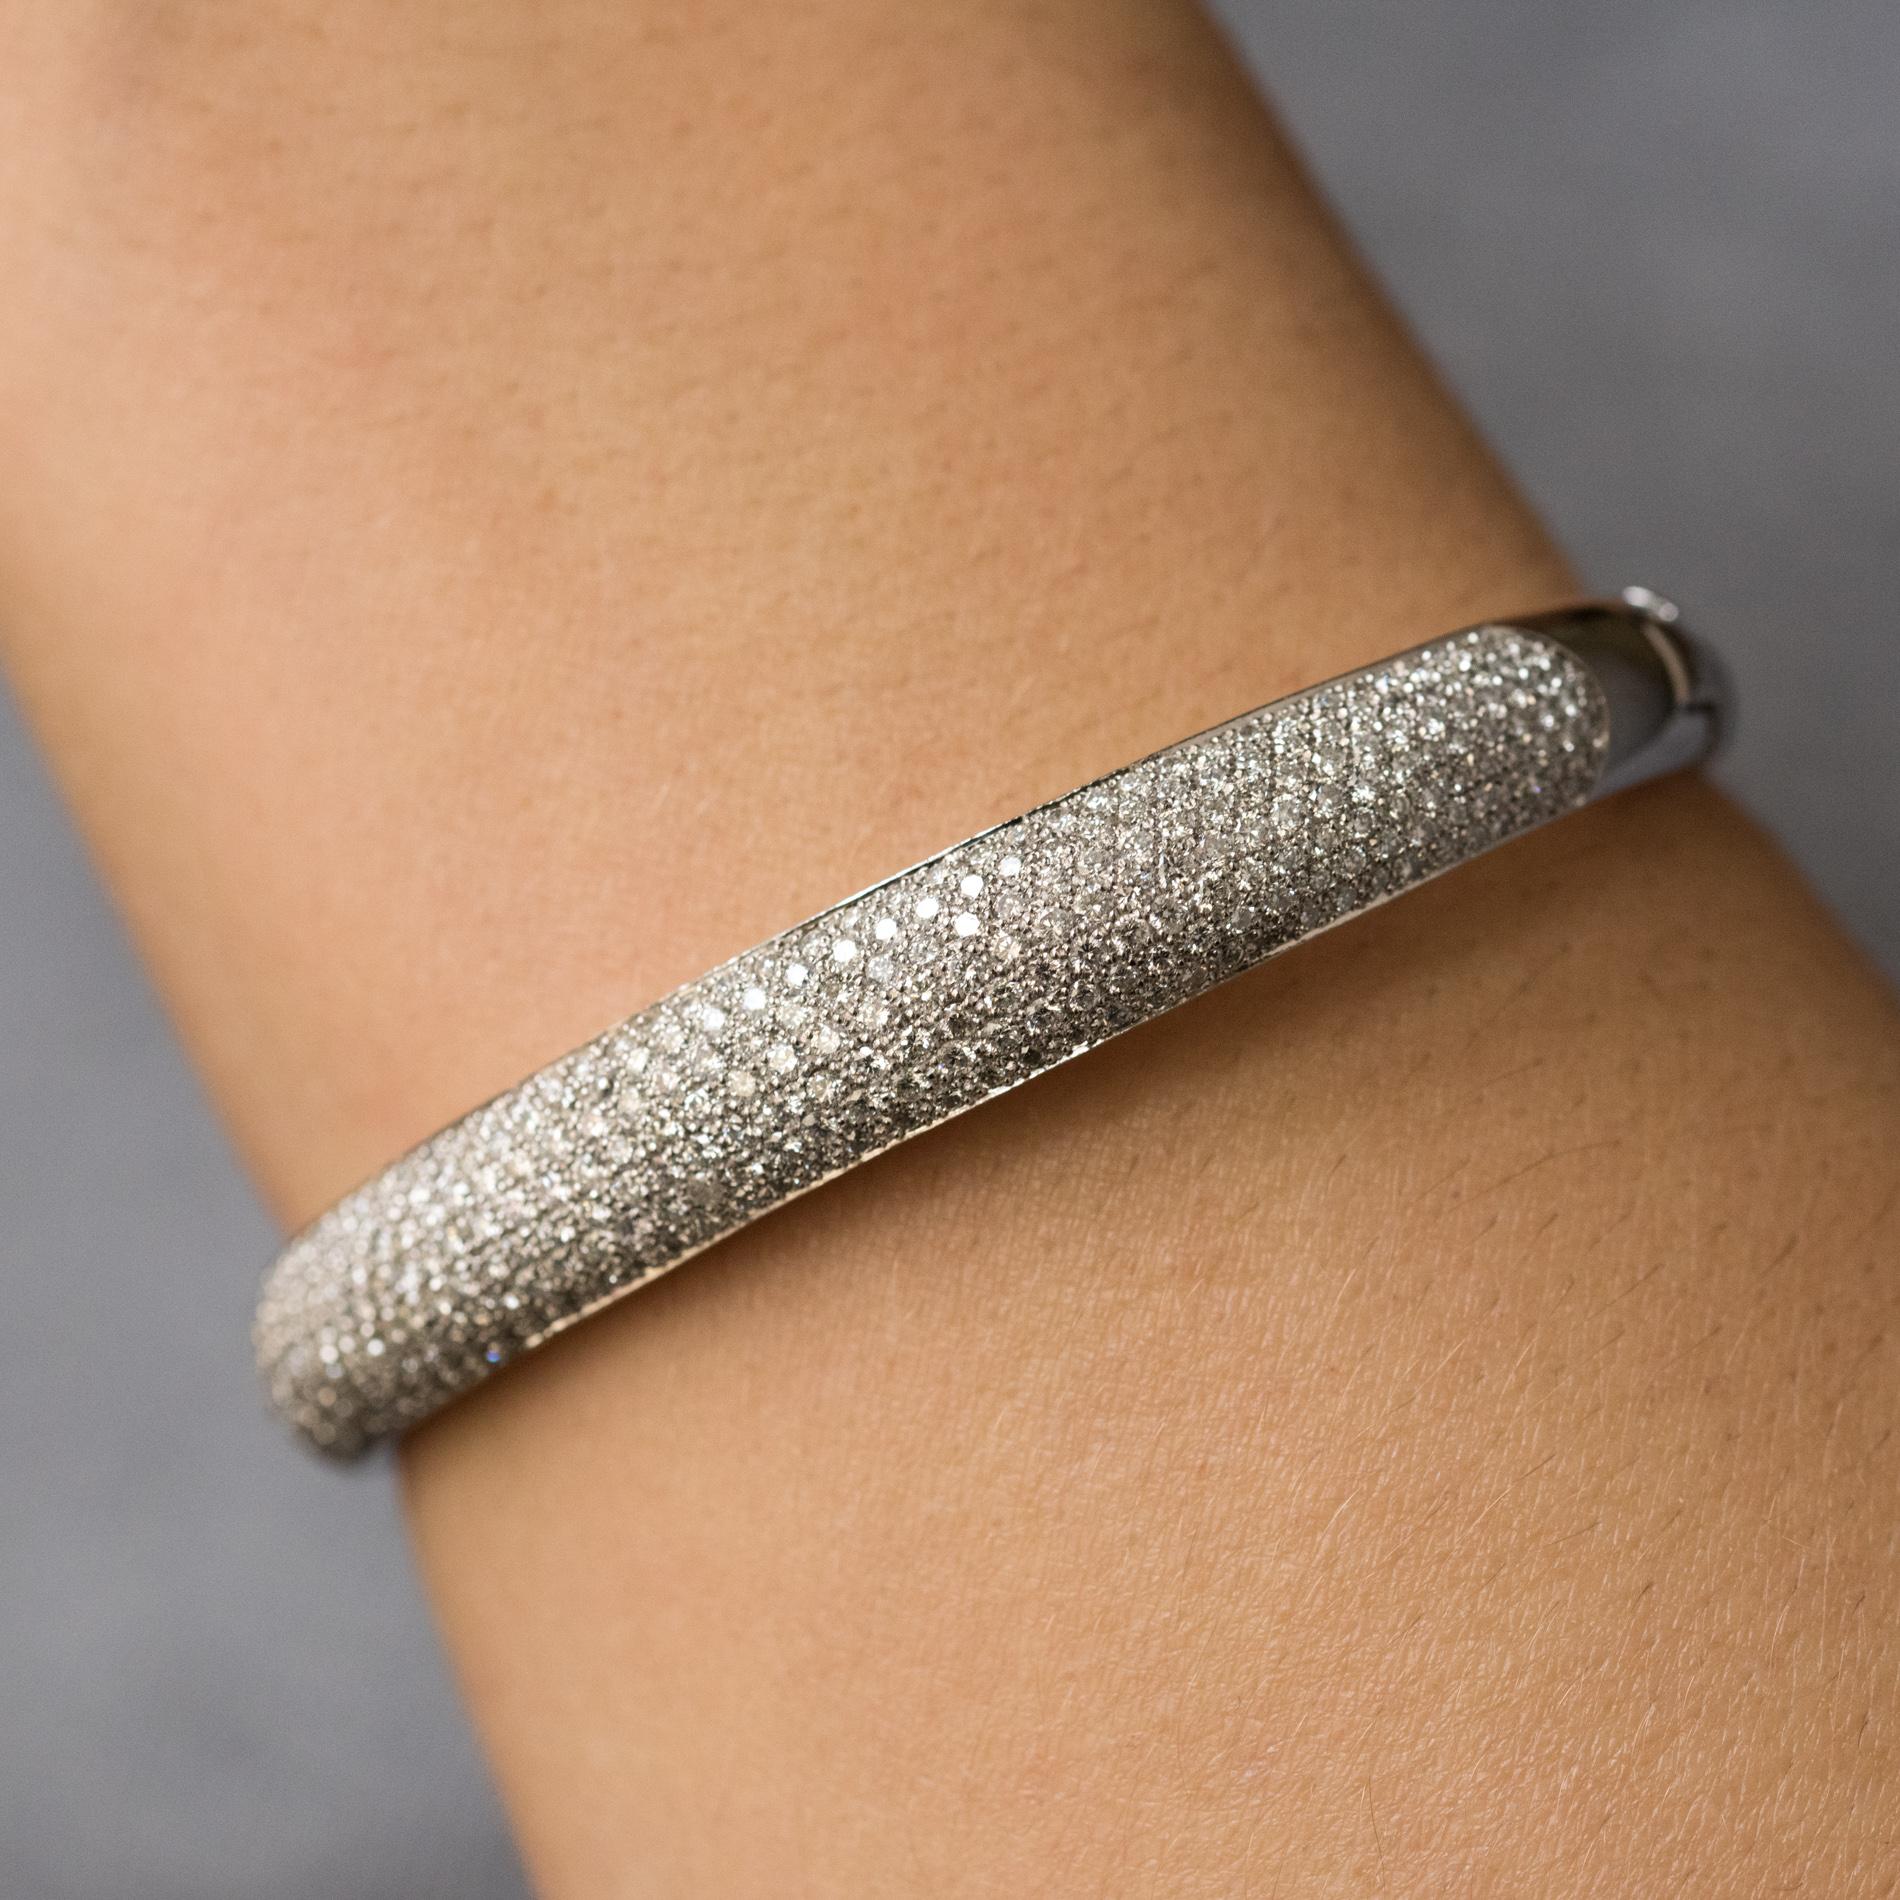 Bracelet in 18 karats white gold, eagle's head hallmark.
Bangle shape, oval, it is paved with diamonds on its top. It is opening on one side by a hinge, the interior is perforated. The clasp is a ratchet with a diamond set on the thumb